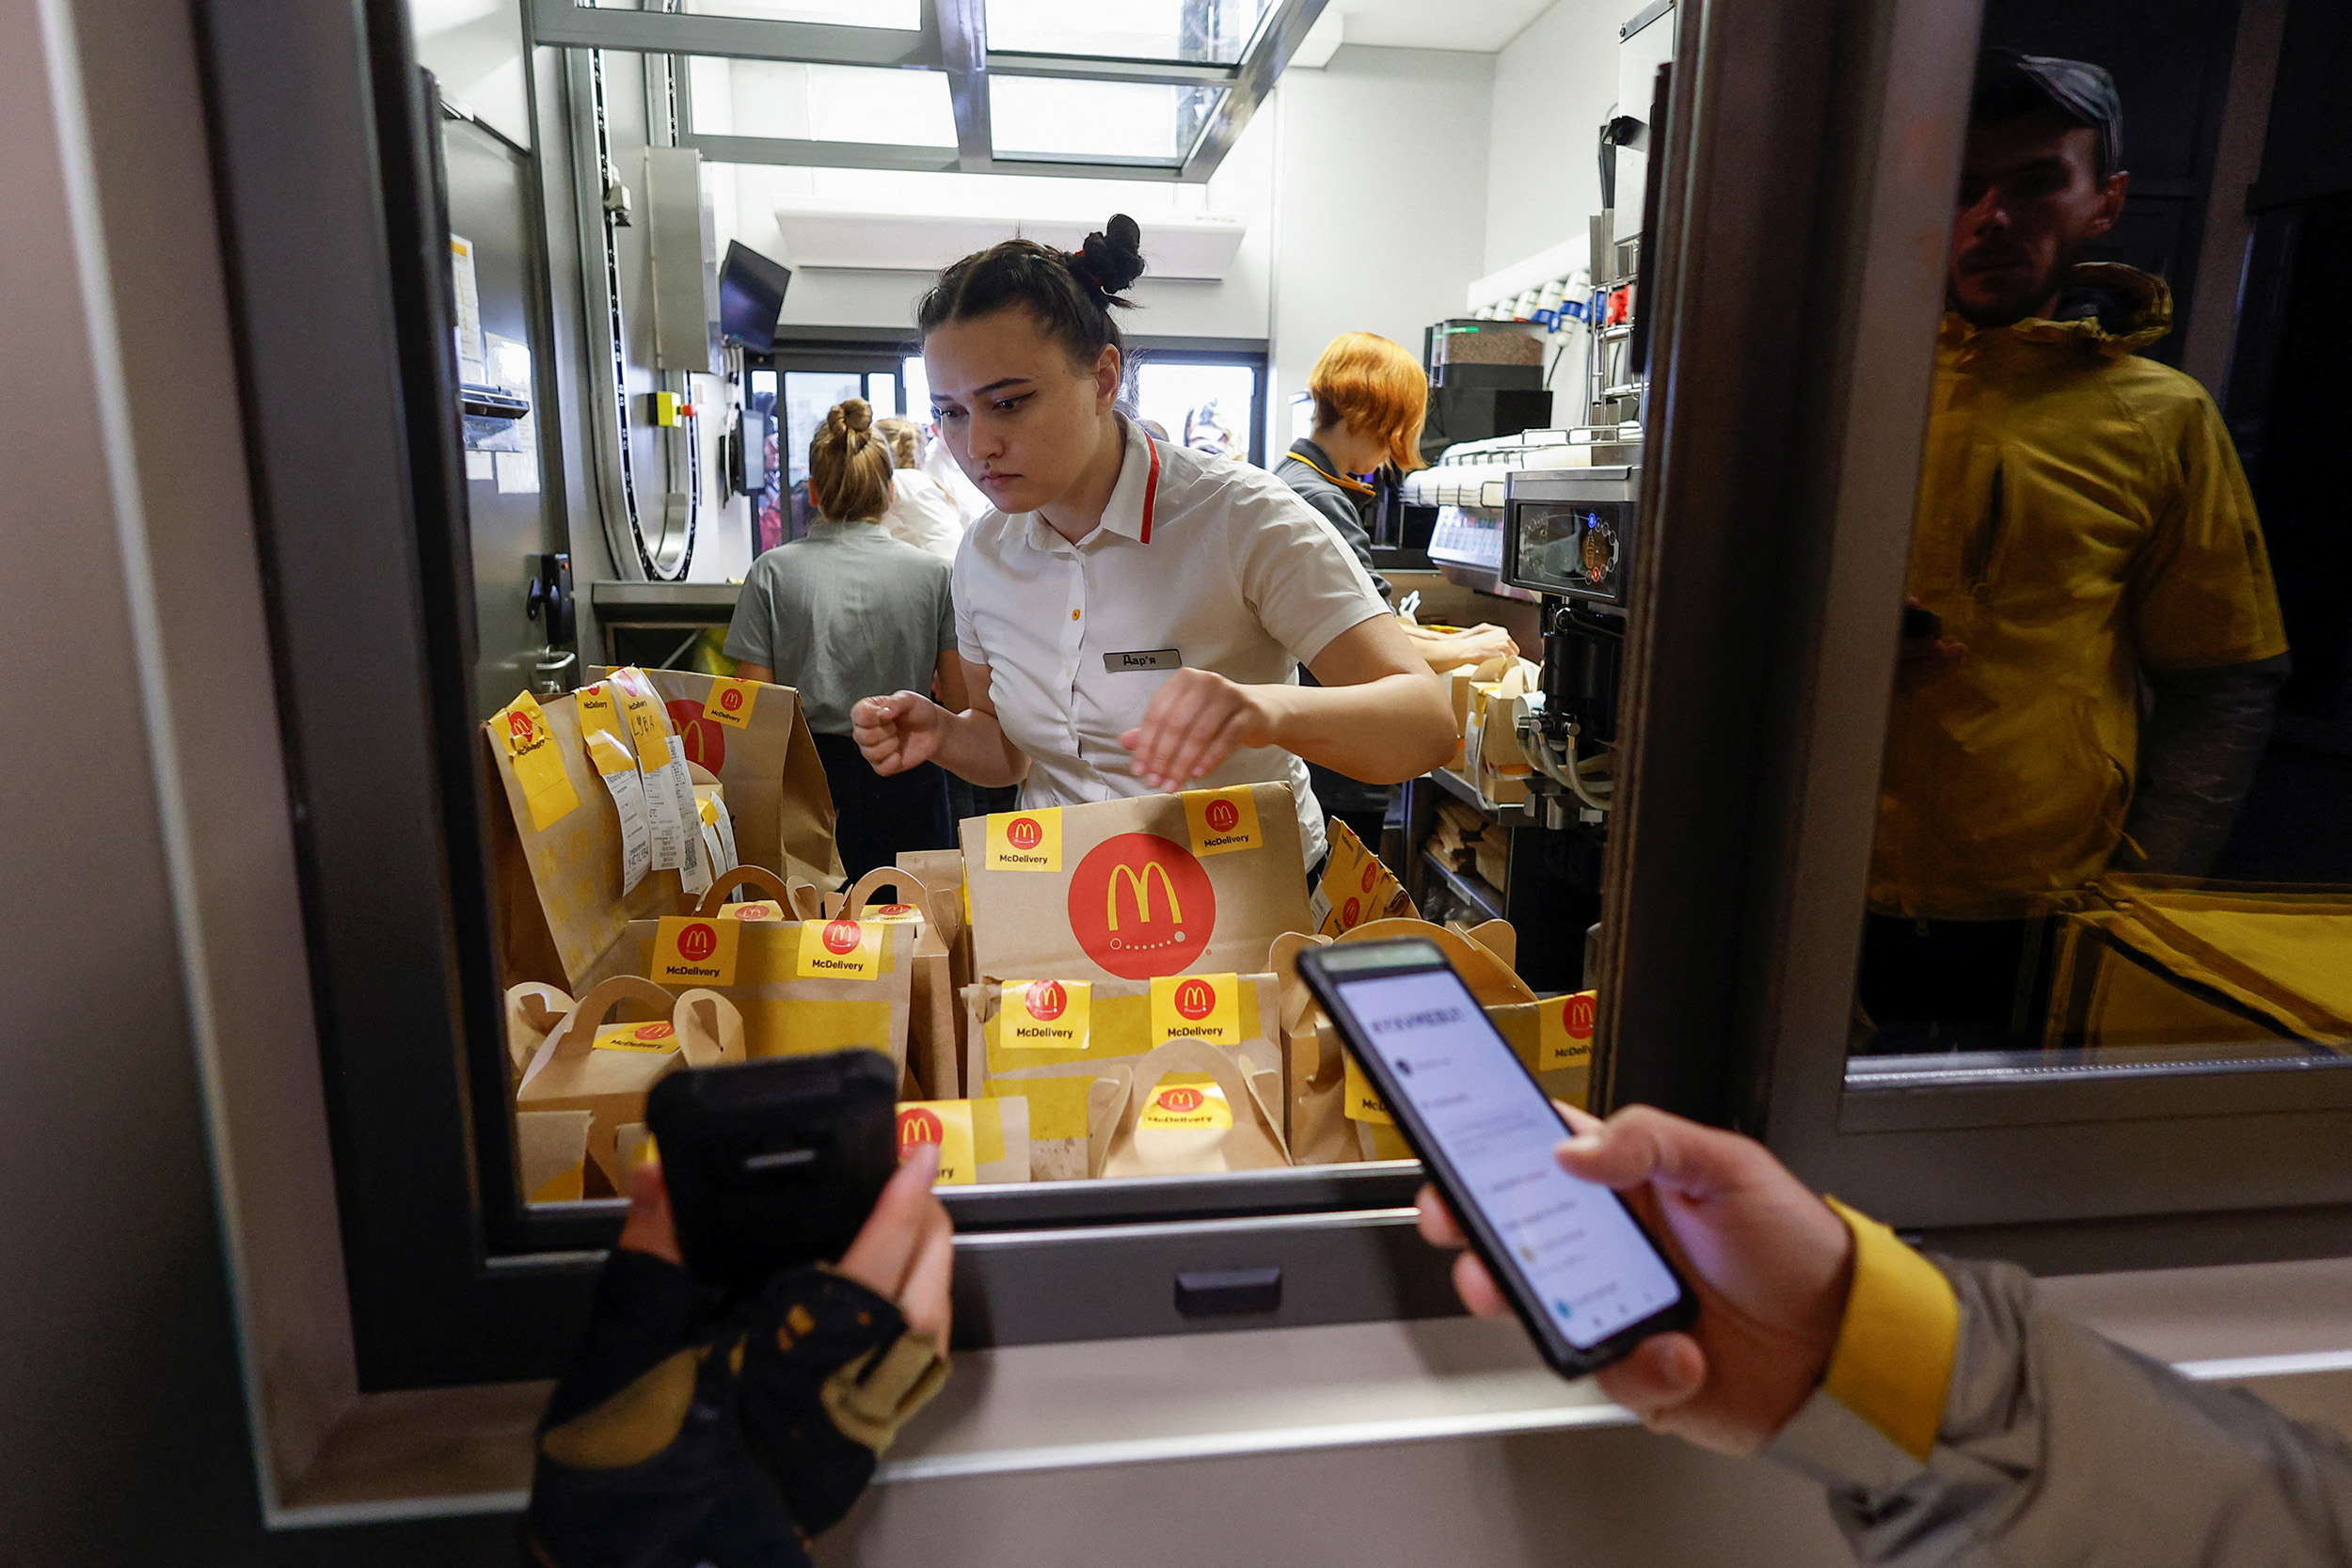 A McDonald's employee checks orders before passing them to Glovo food delivery couriers after the chain reopened in Kyiv, Ukraine, on September 20.